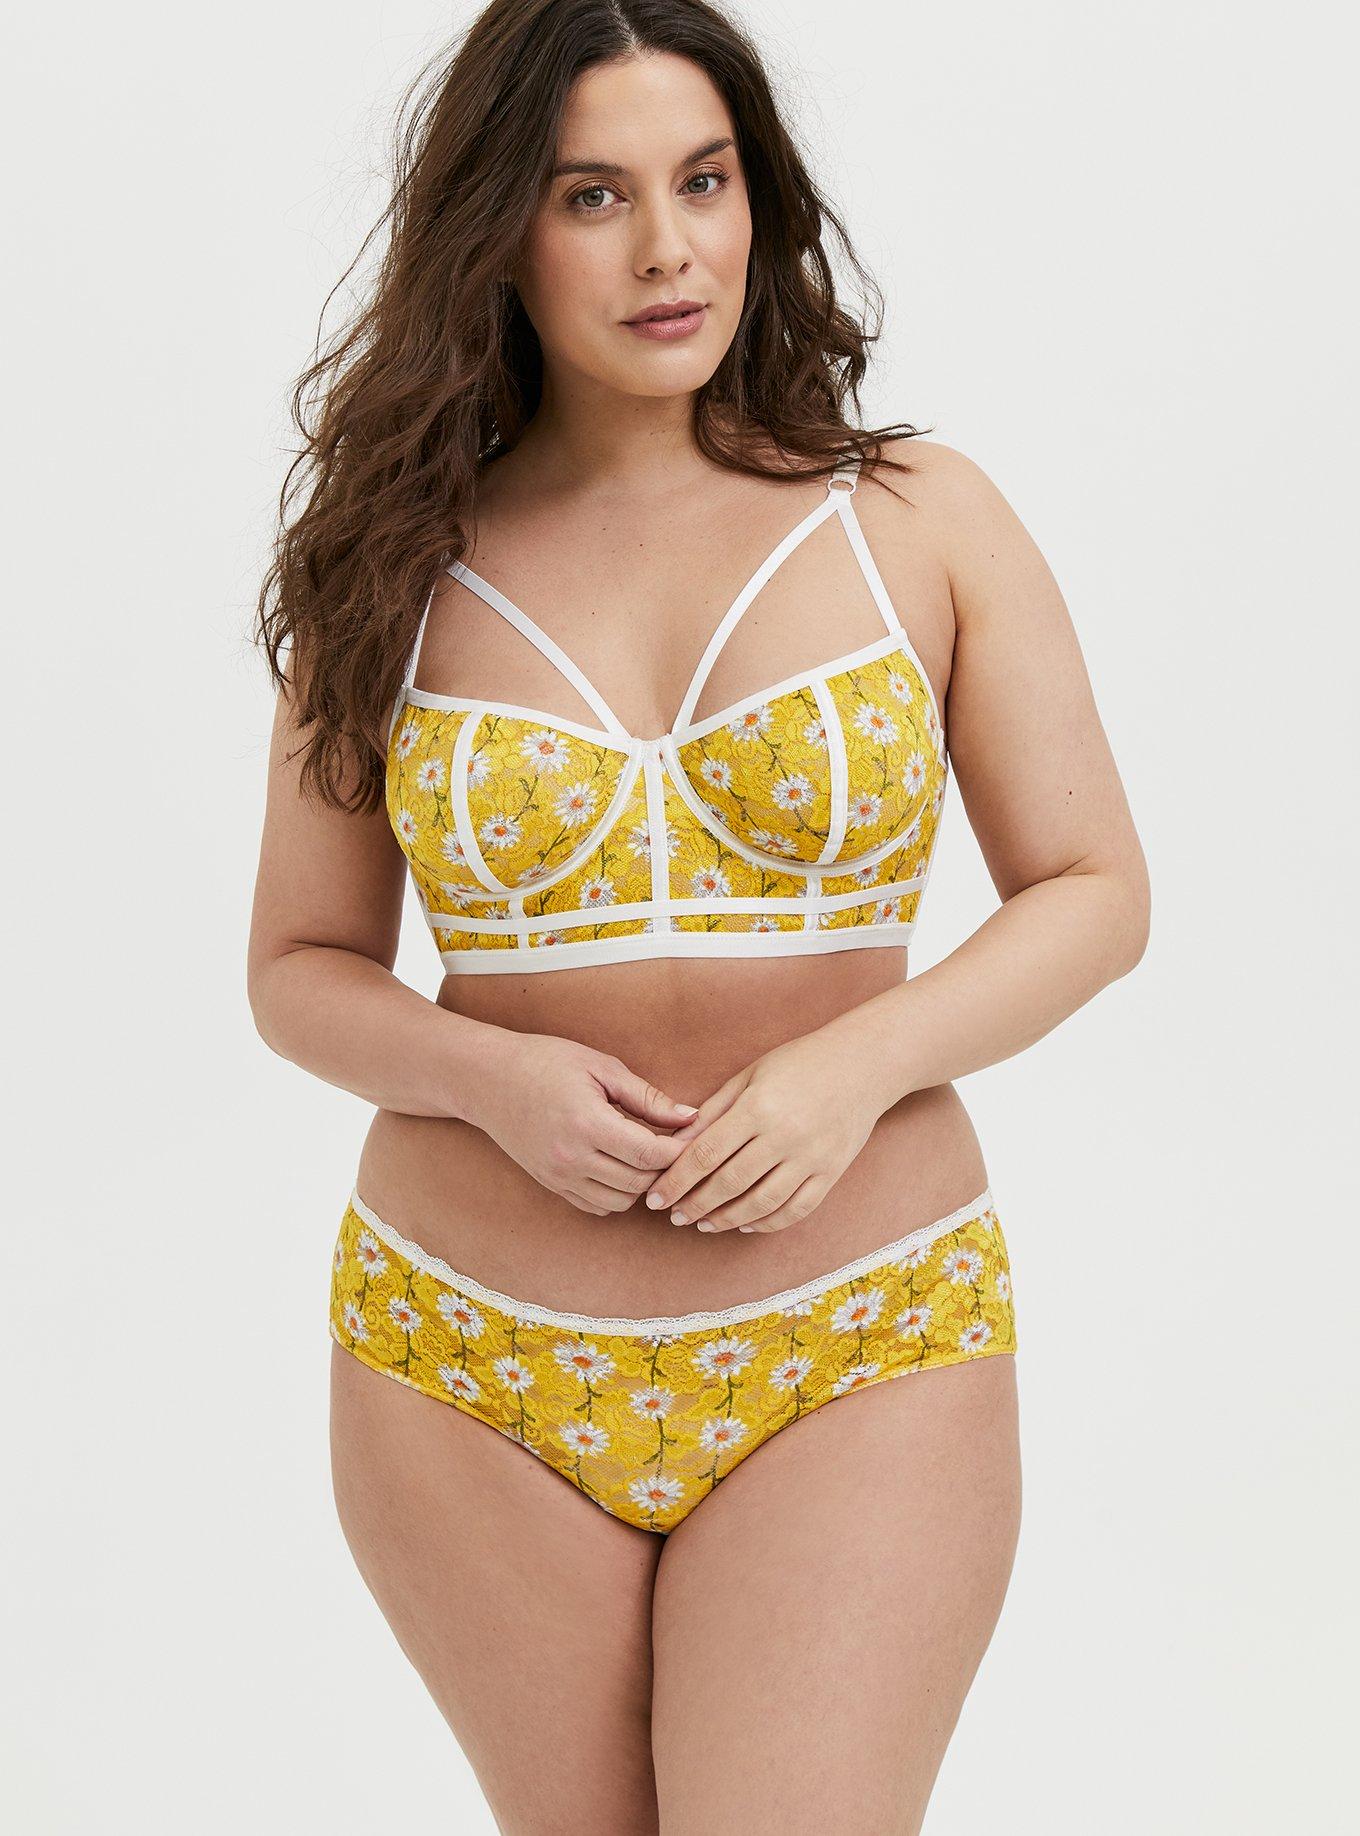 Floral lace underwire bra Woman, Yellow